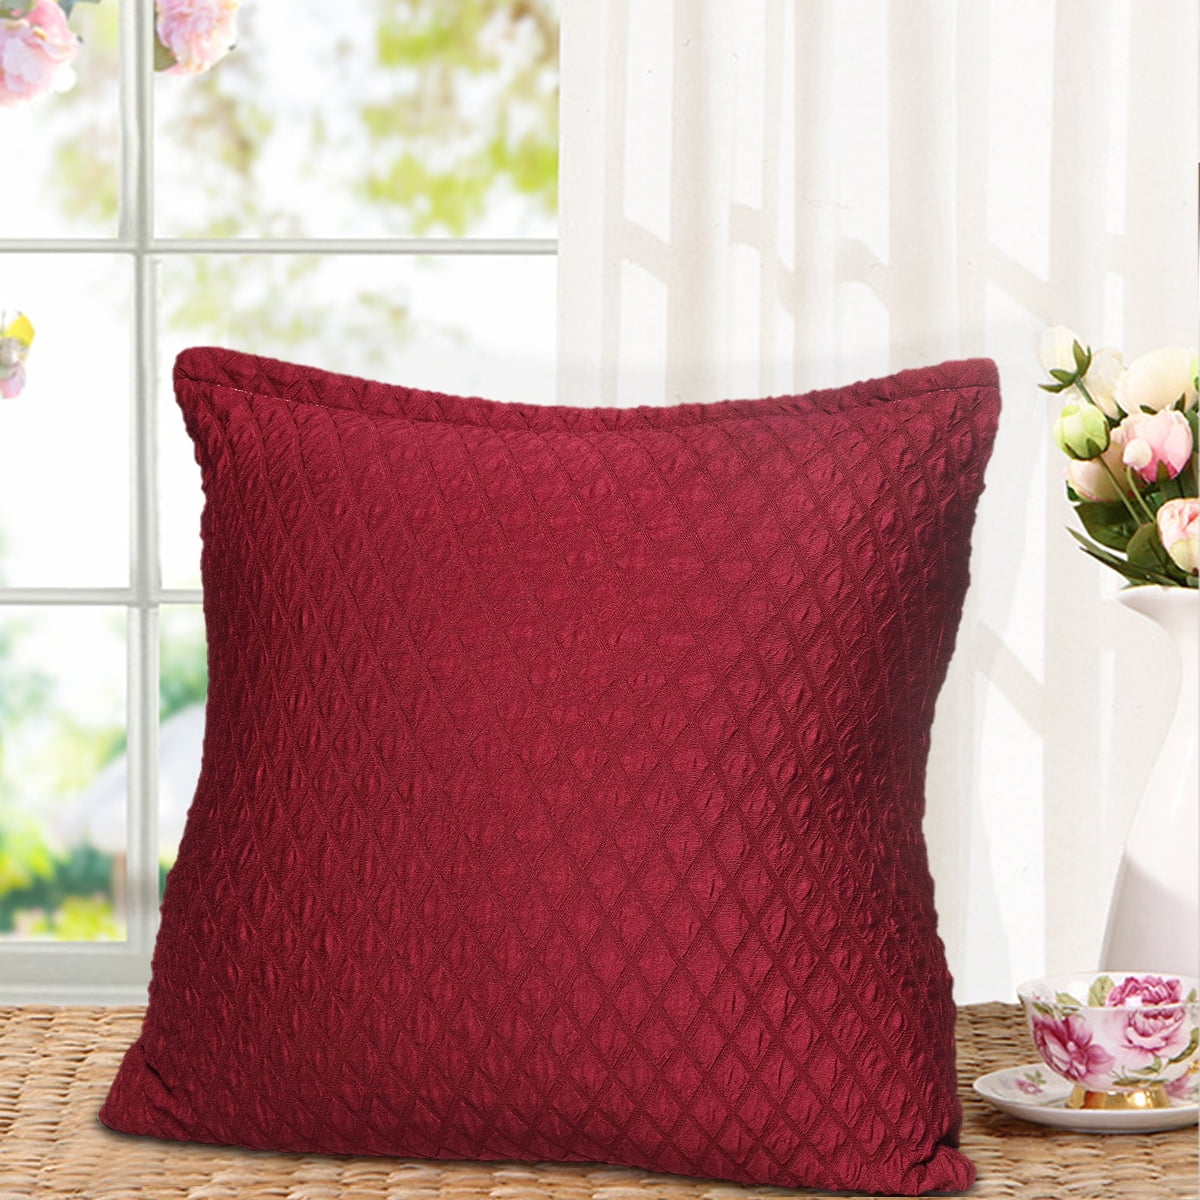 32 Best Pictures Decor Pillows Clearance / Meigar Decorative Throw Pillow Cover Clearance 16.5X16.5 ...